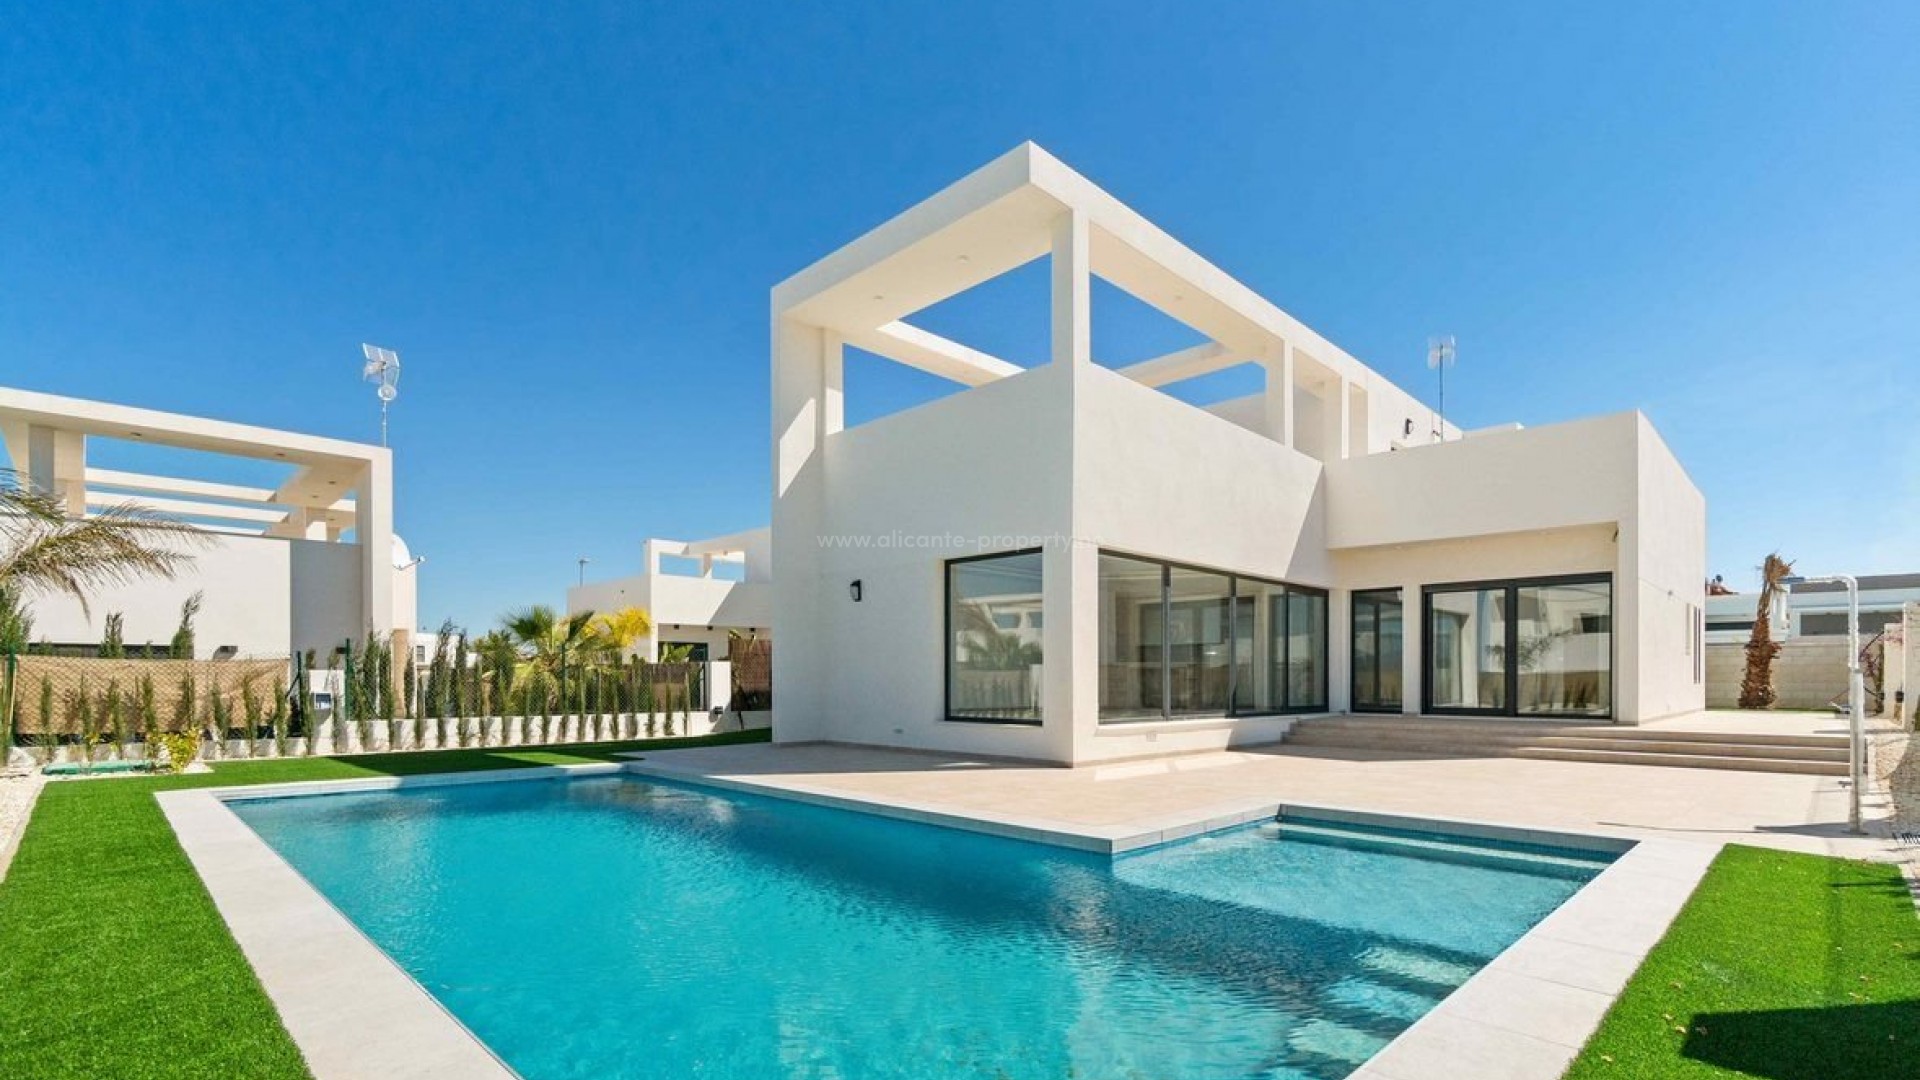 Modern villa/house in Benijofar, 3 bedrooms, 2/3 bathrooms, fantastic private pool, terrace and solarium. Golf at La Marquesa Club only 5 minutes away